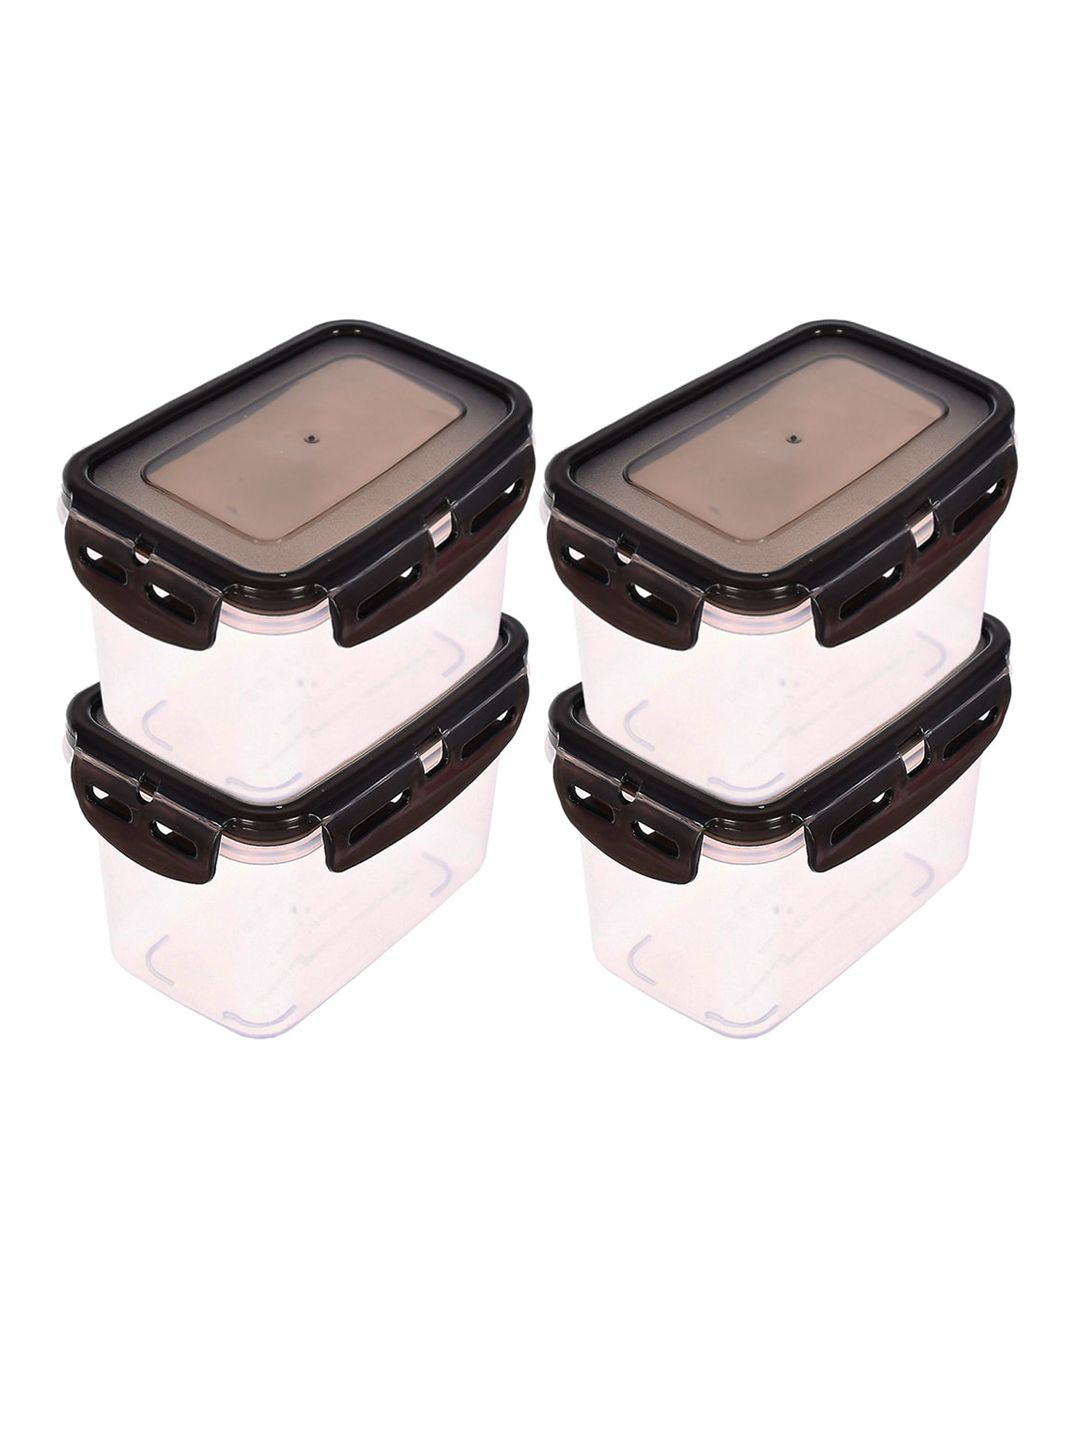 Kuber Industries Black Plastic Food Storage Container With Airtight Lock Lid- 600ml Price in India